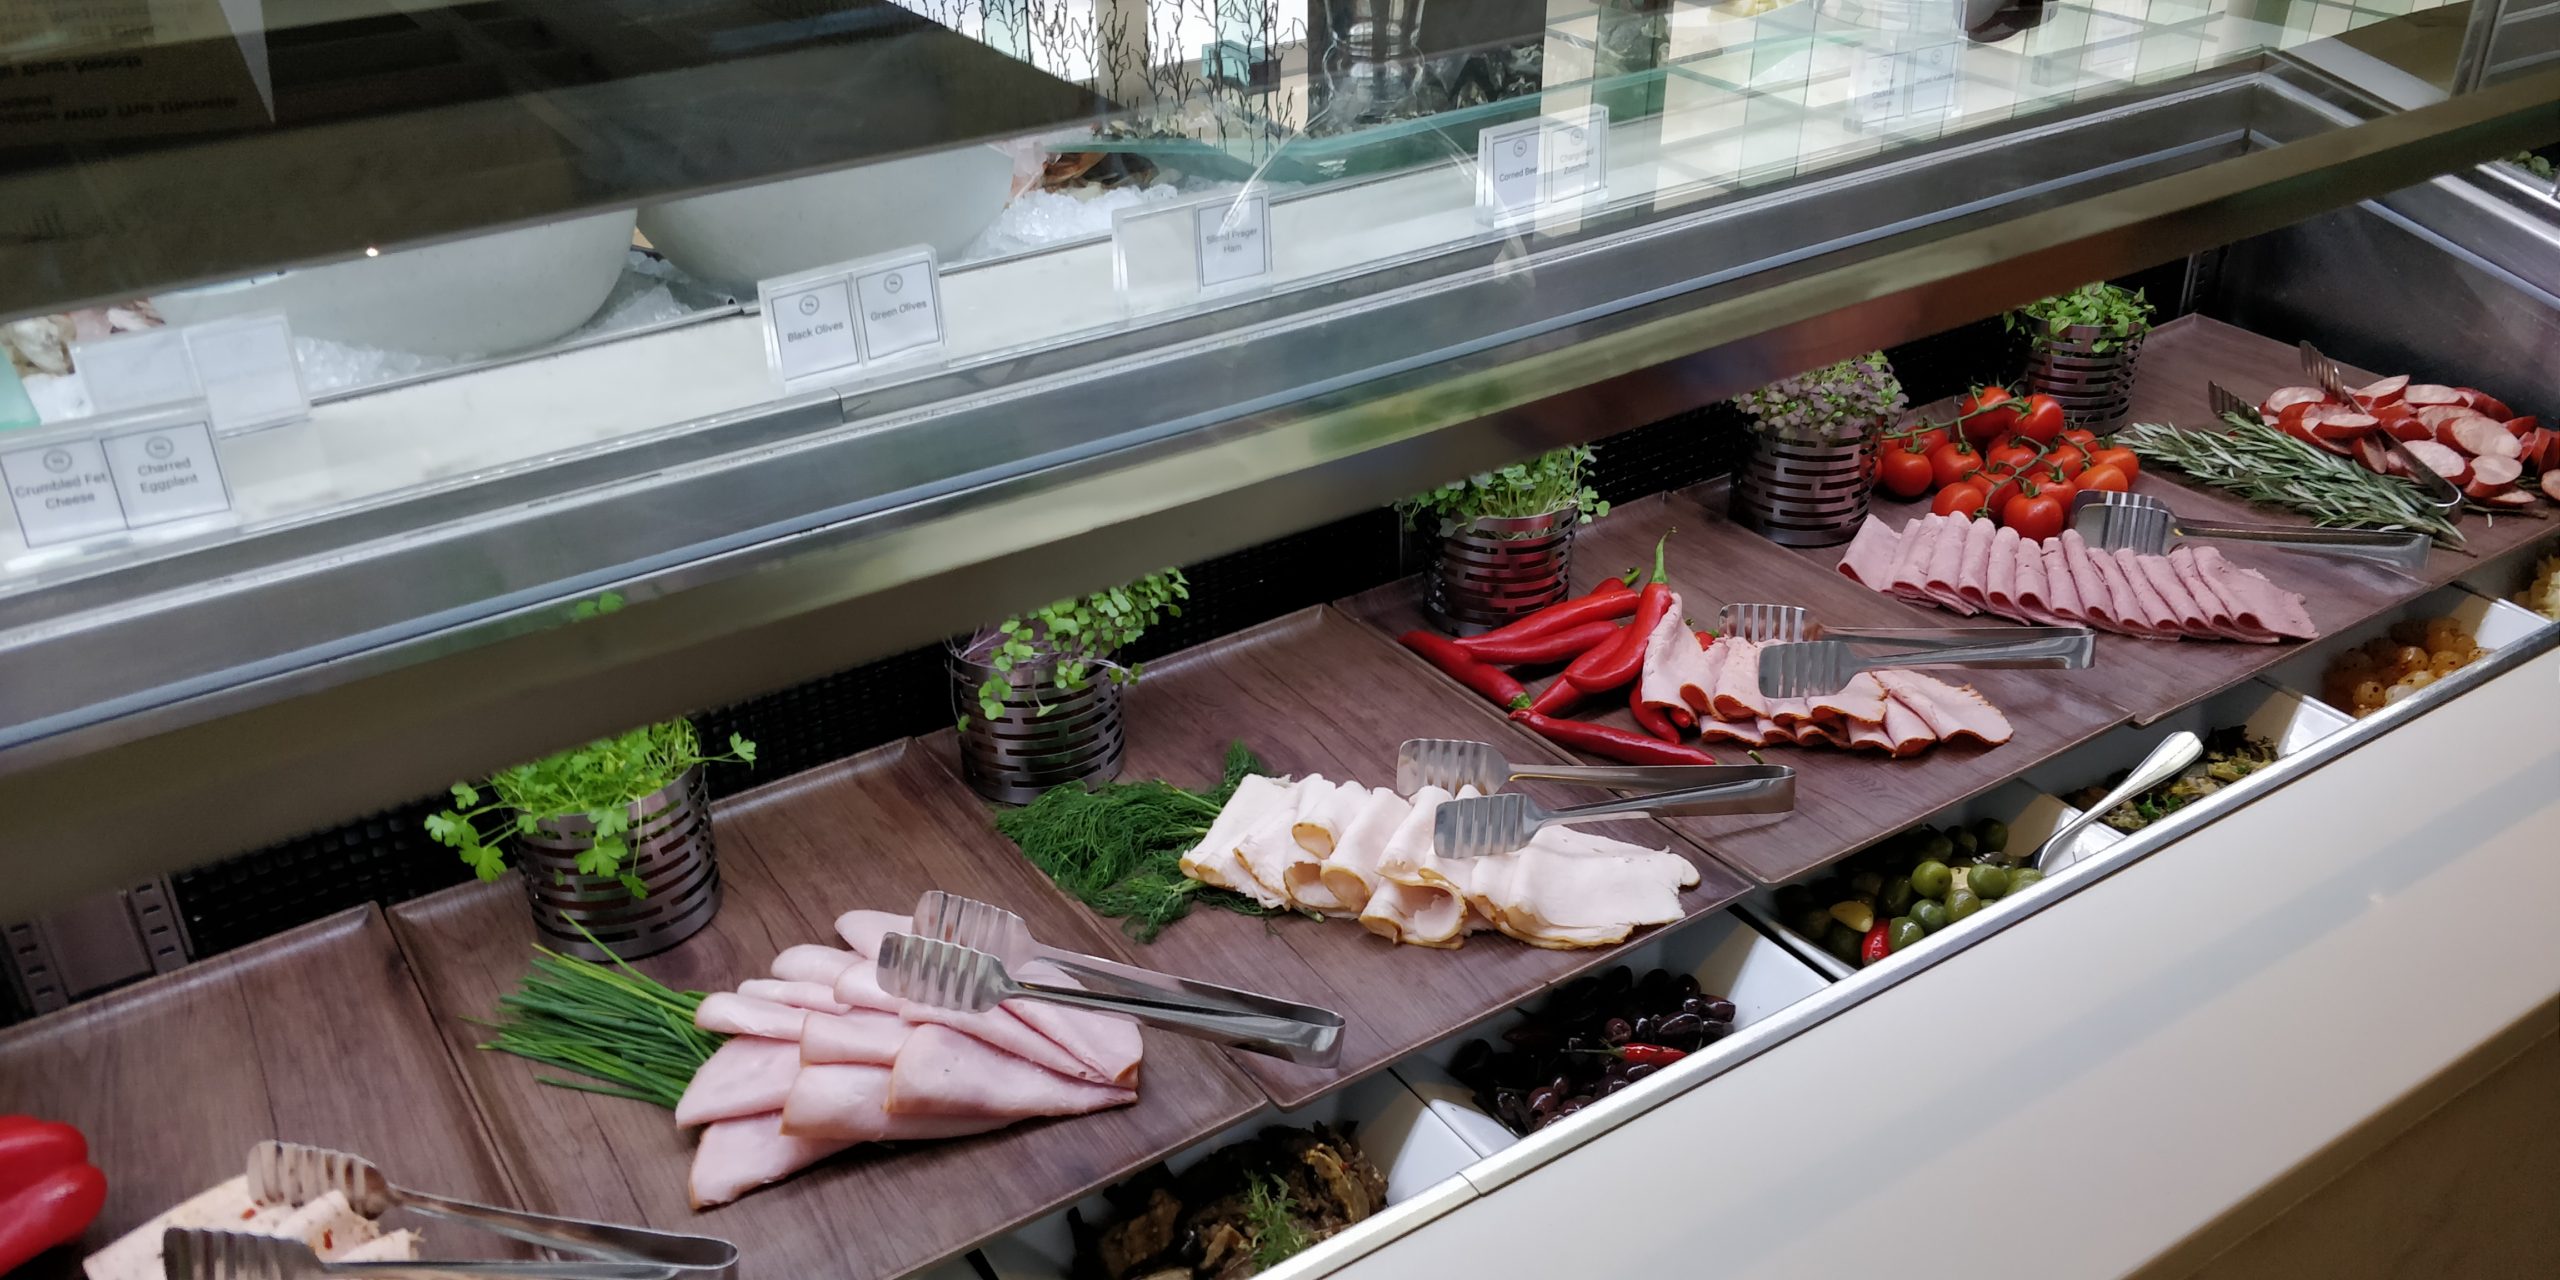 Review the Grand Mirage Resort
picture of the cold cuts on offer